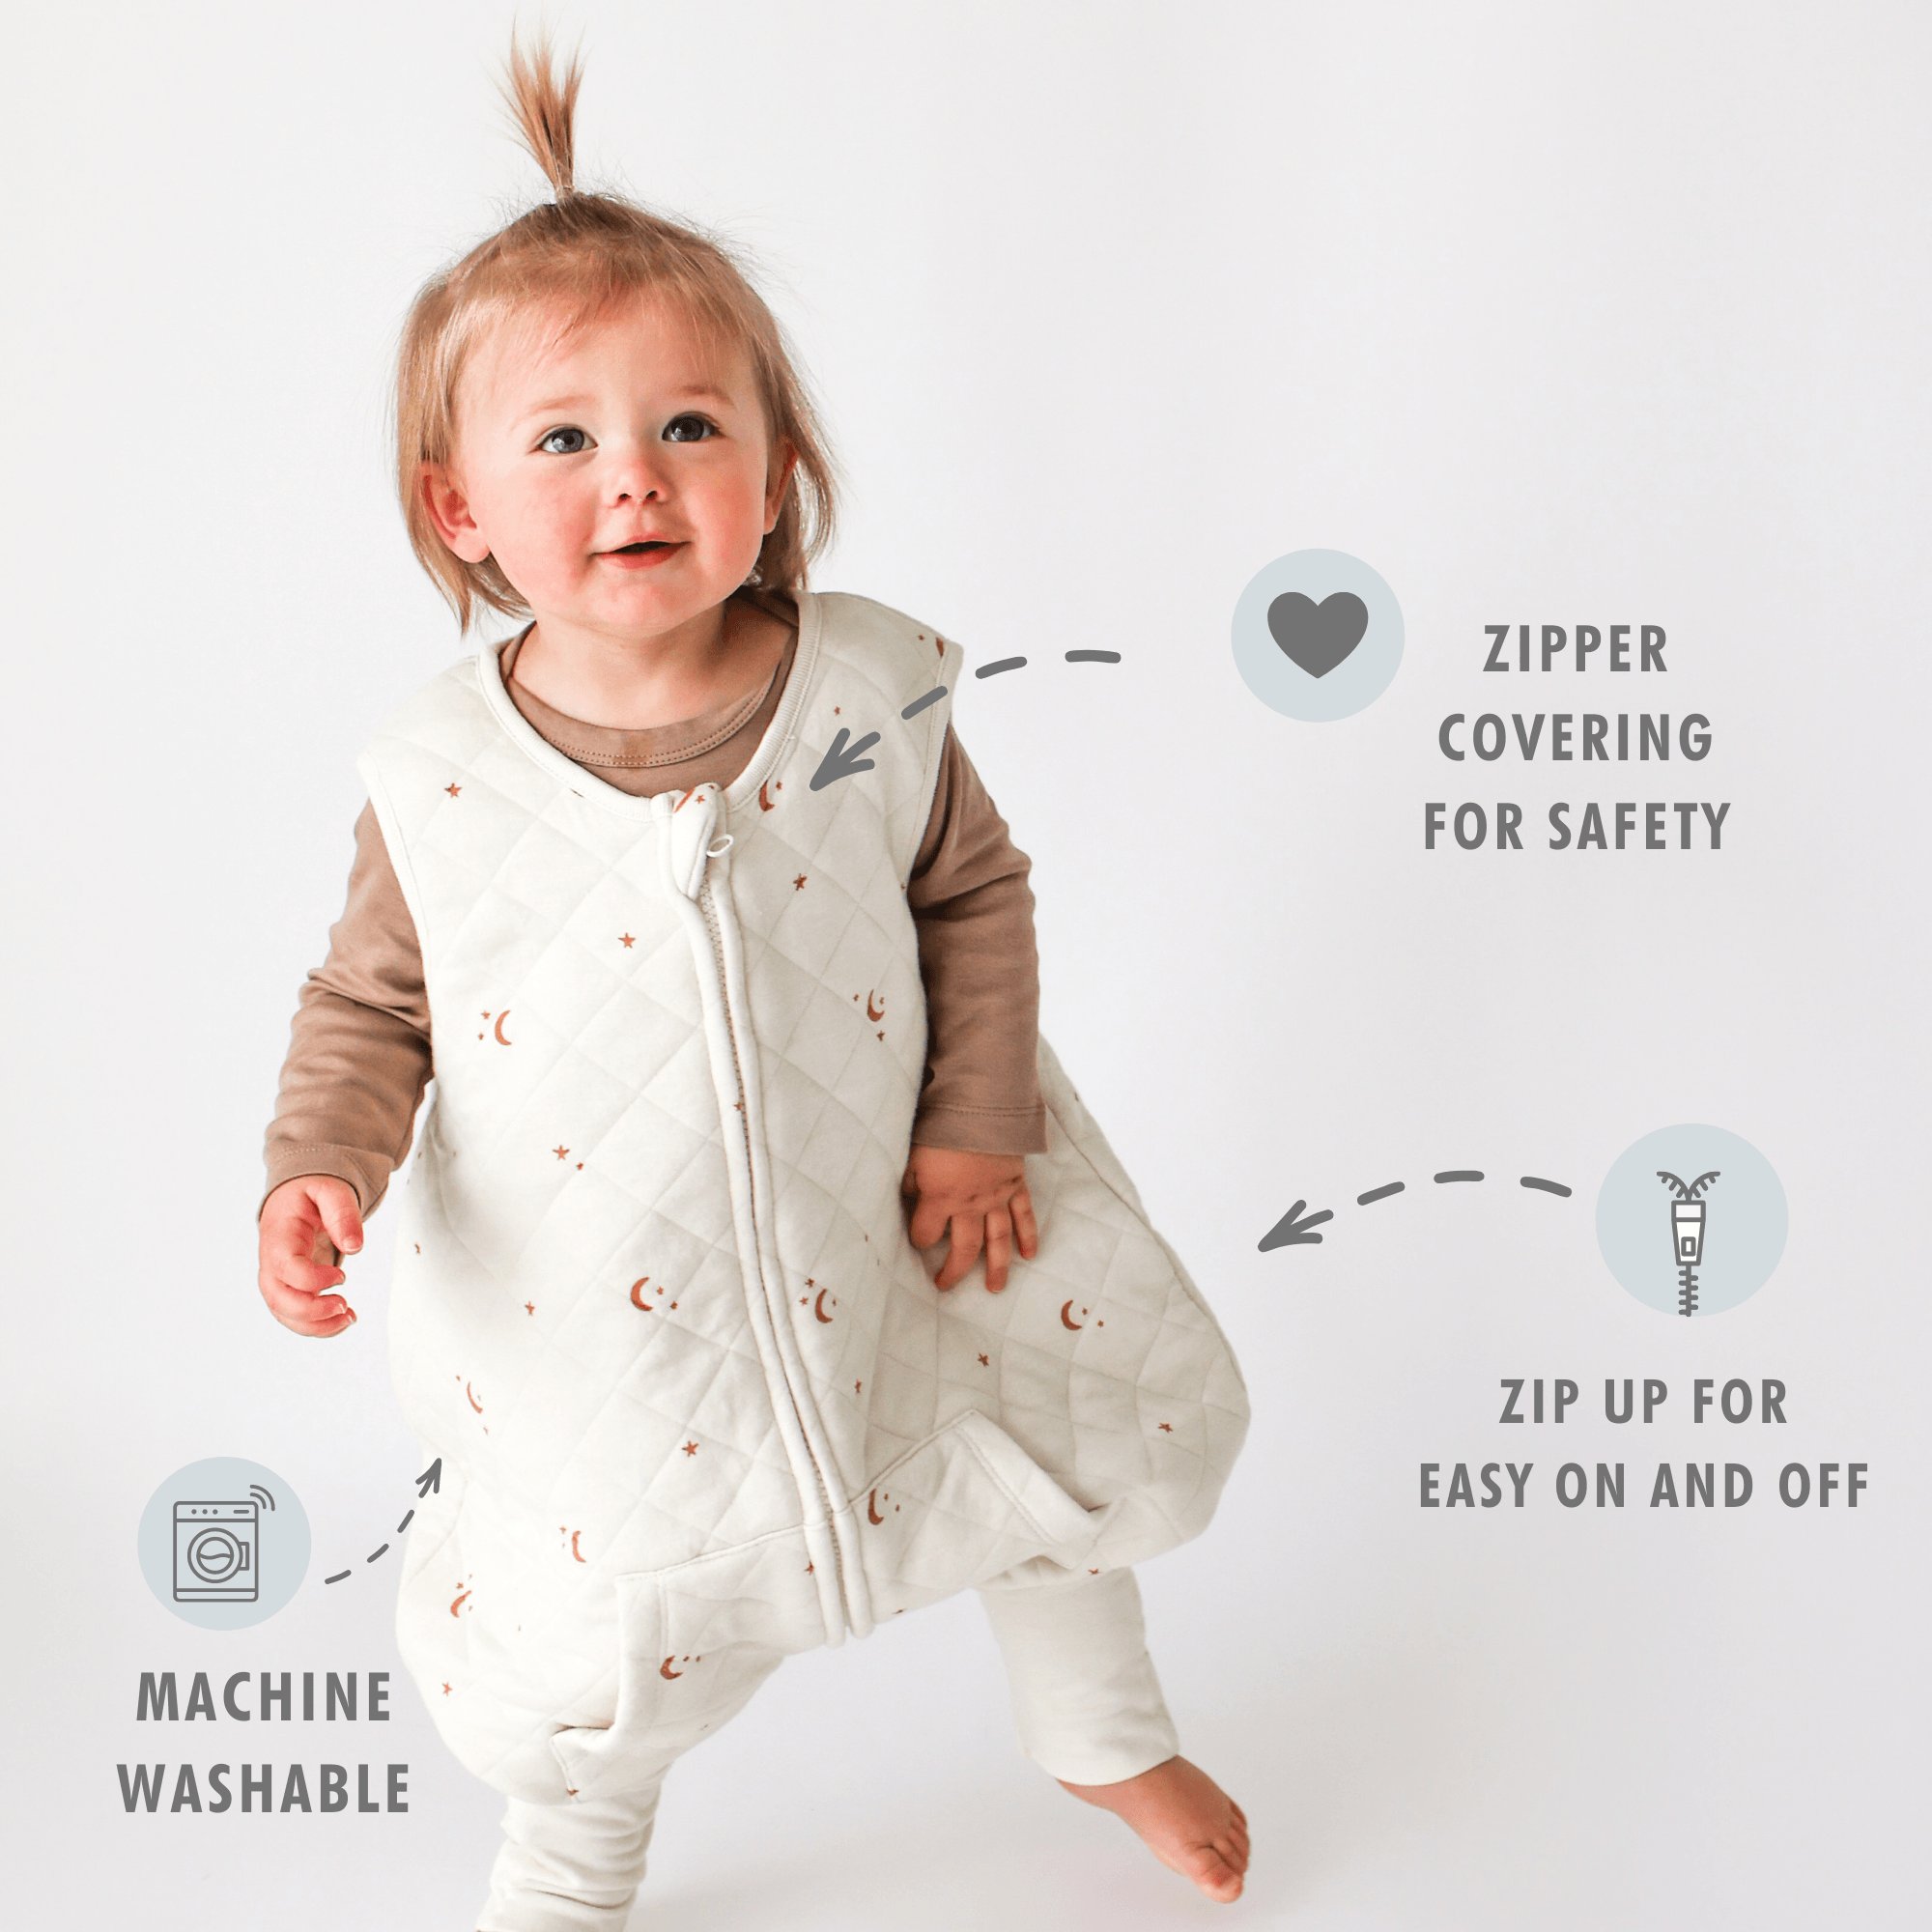 Tealbee Moon & Stars Dreamsuit Sleep Sack - zipper covering for safety, machine washable, zip up for easy on and off.